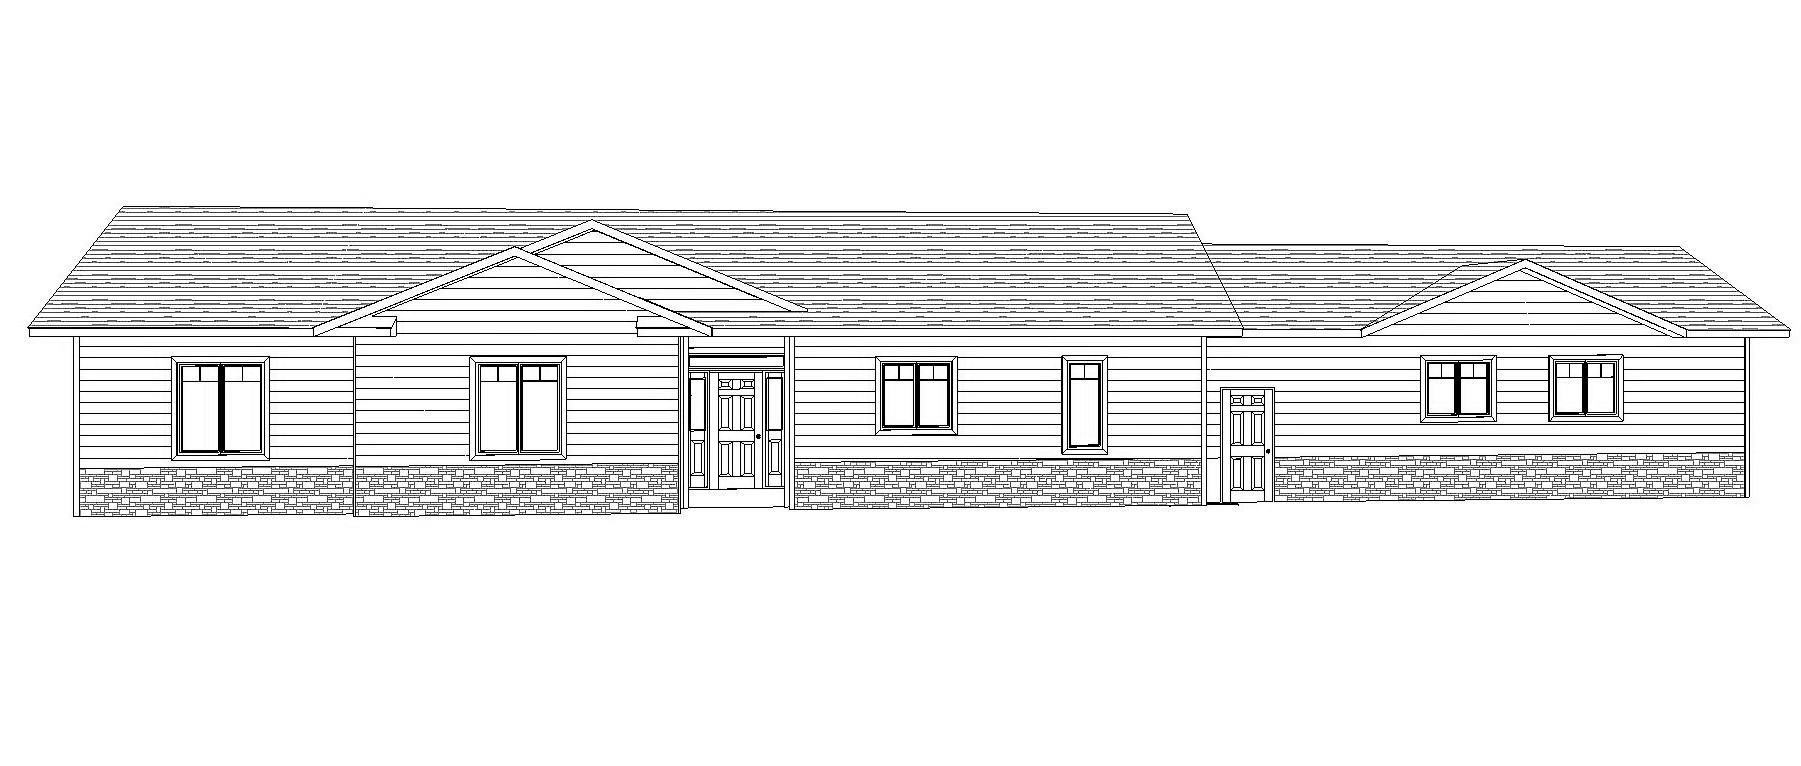 Penner Homes Elevation Map Id: 412